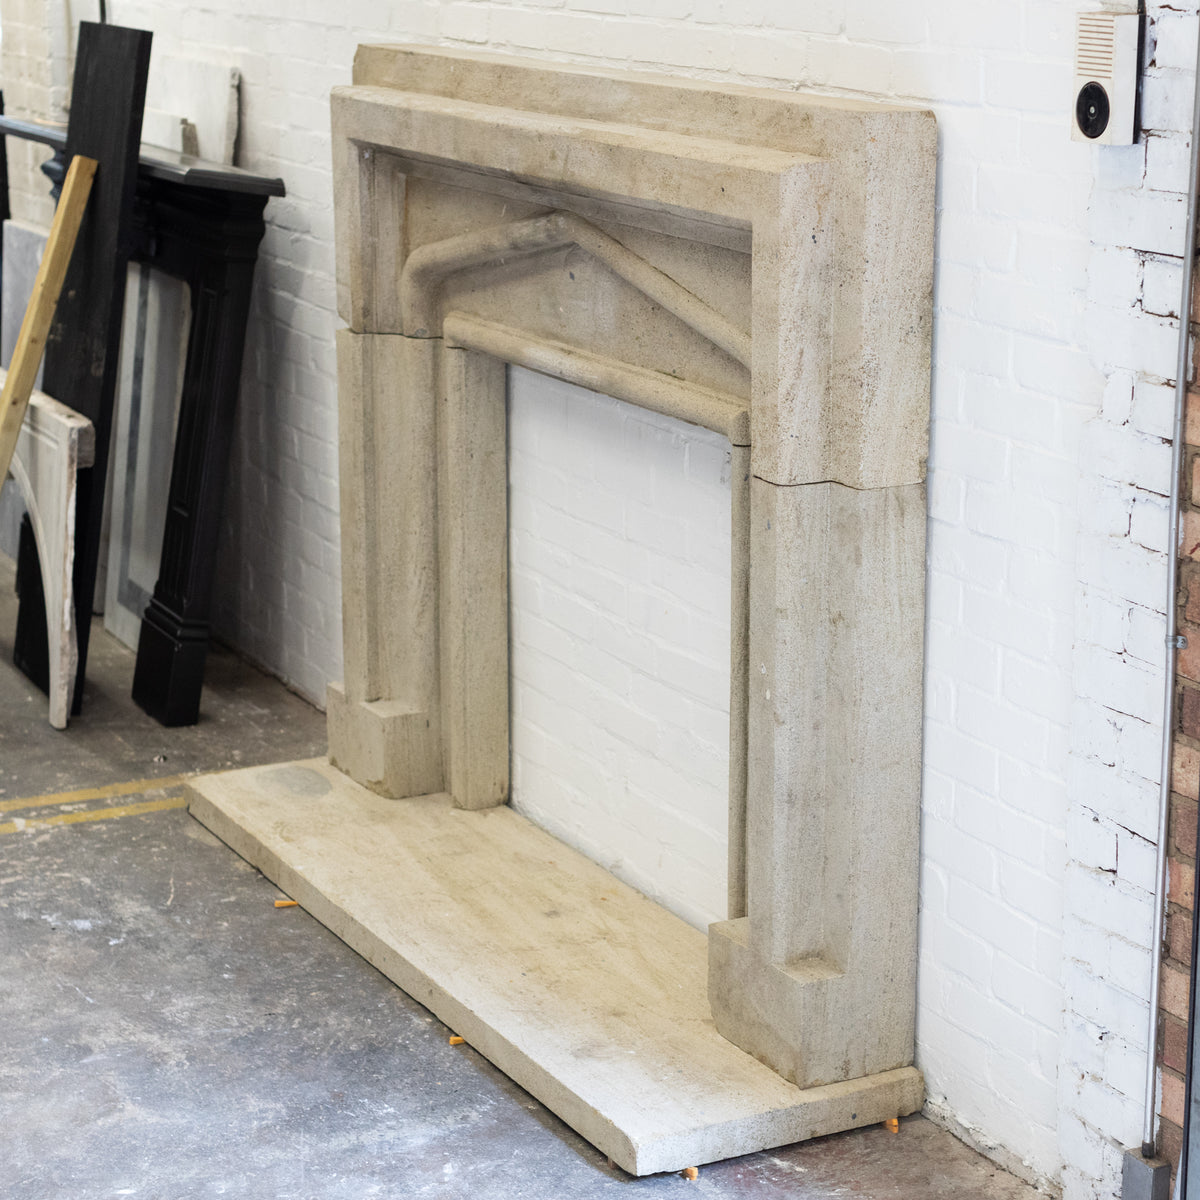 19th Century Gothic Style Stone Fireplace Surround with Hearth | The Architectural Forum